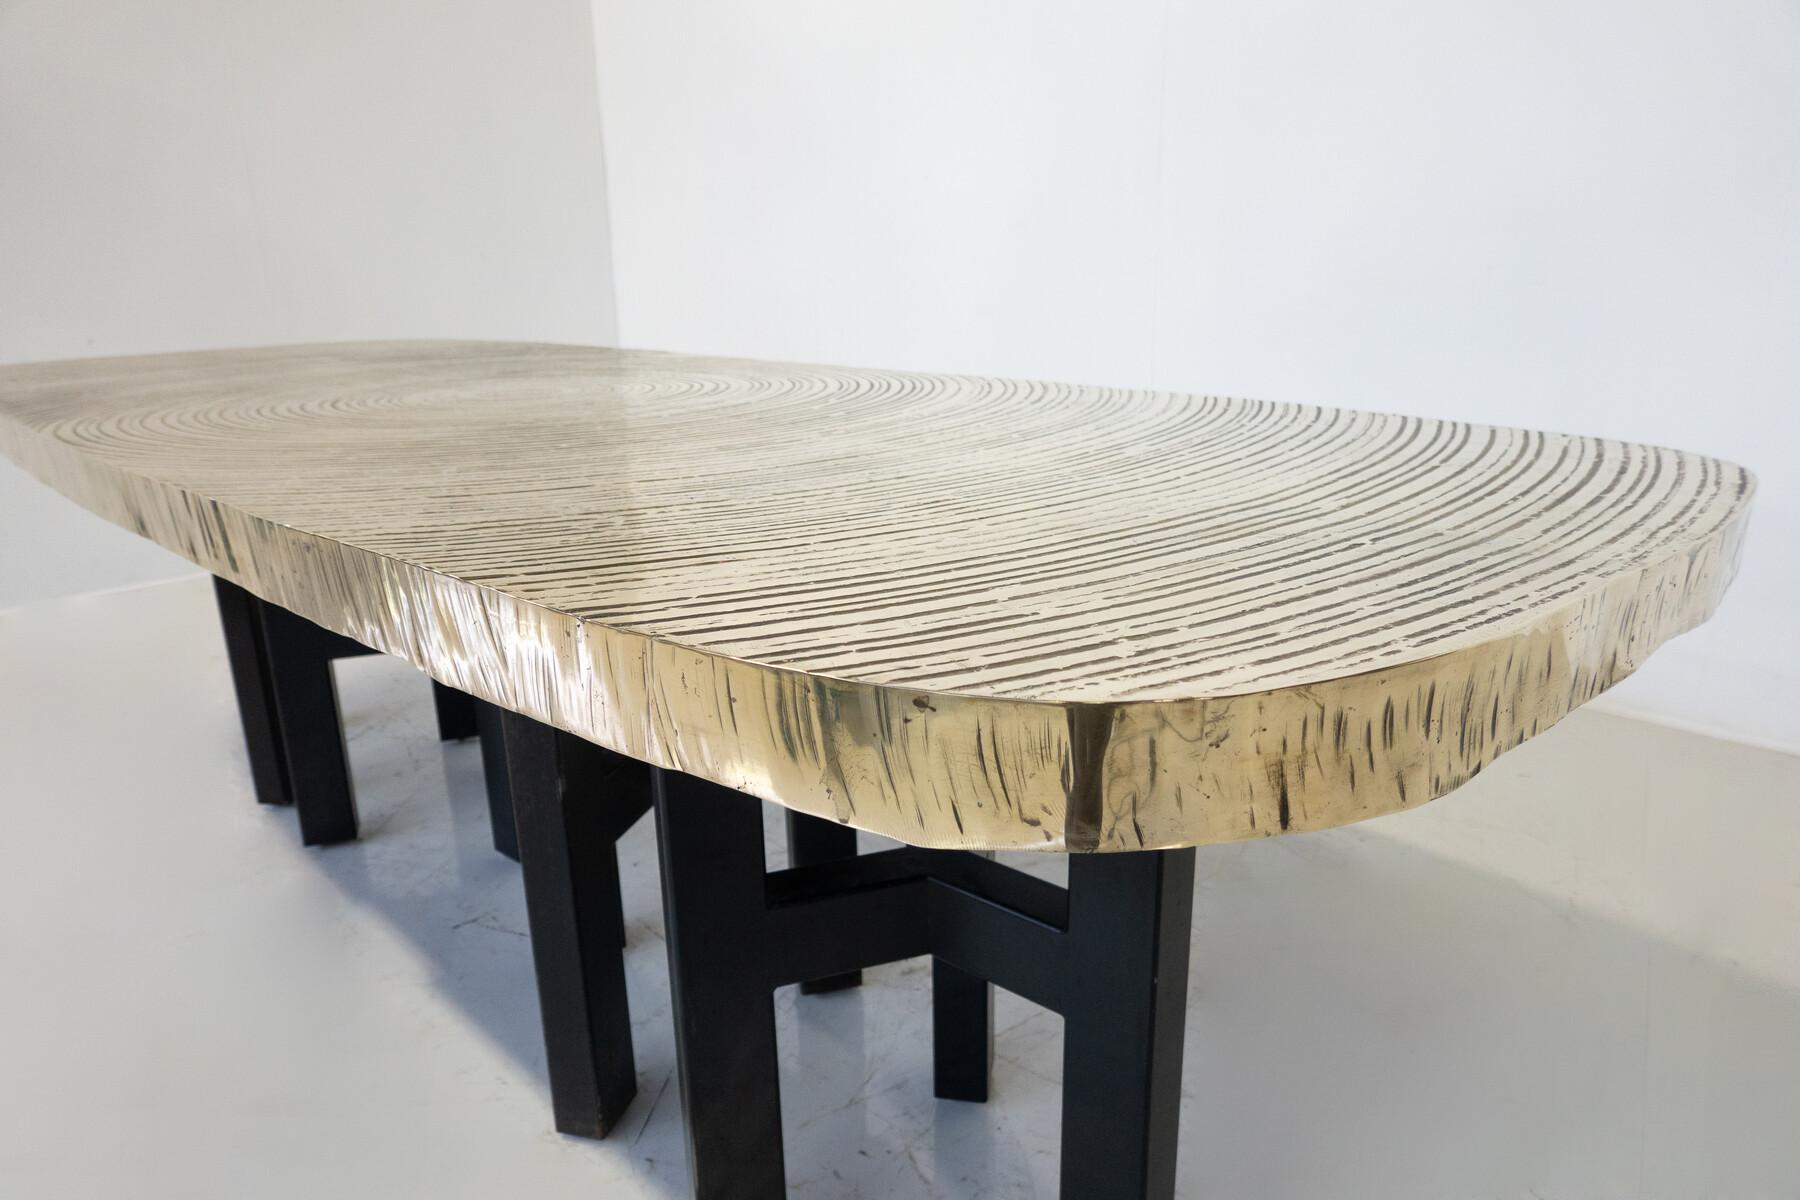 Mid-Century Modern Dining Table Goutte d'Eau by Ado Chale, Bronze, Belgium - Signed, 1970s For Sale